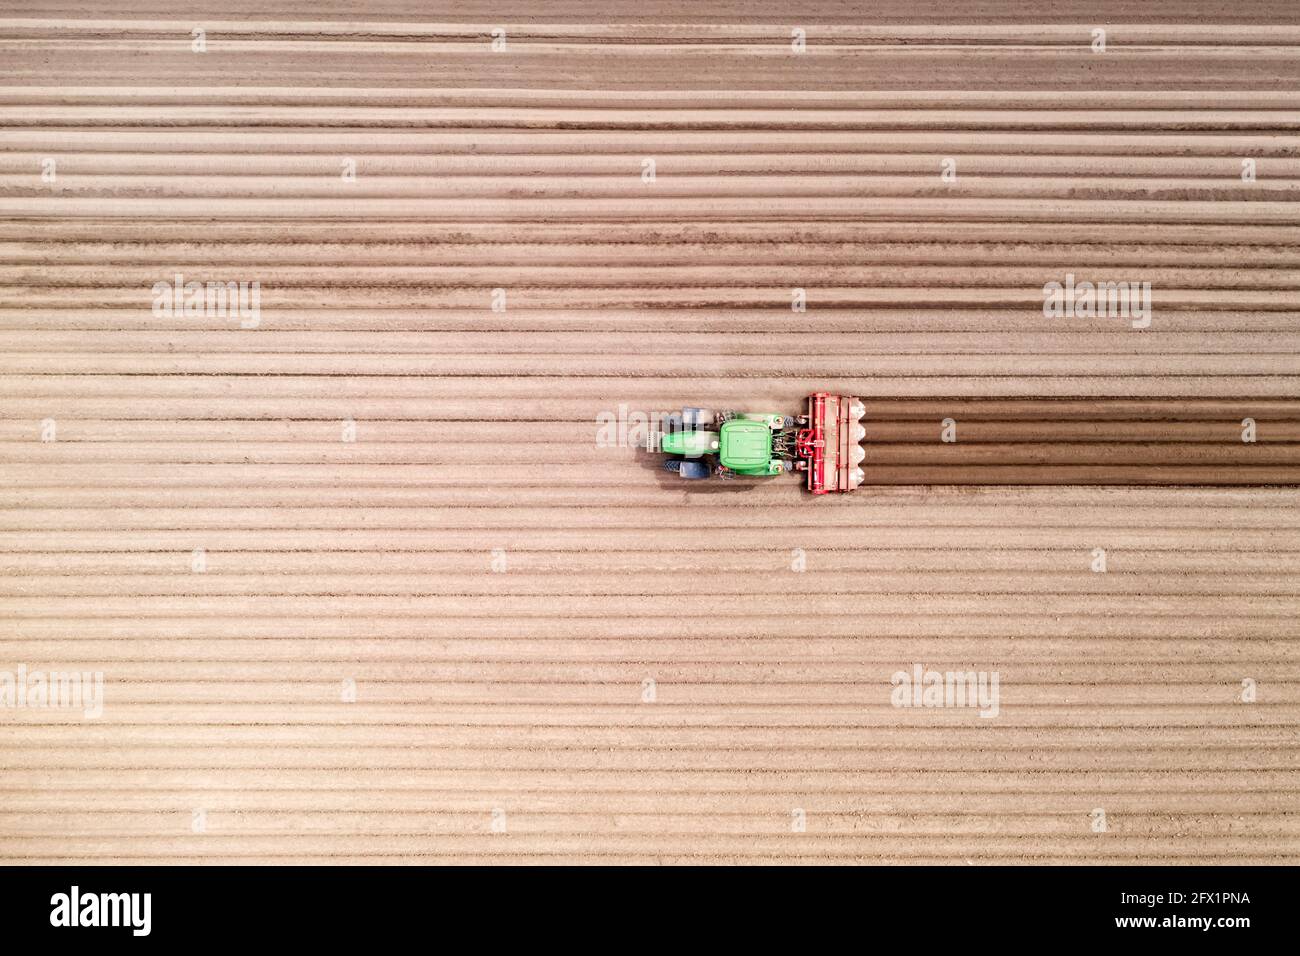 Lonely tractor on agricultural field with rows of plowed soil. Agricultural fields prepared for planting crops, topdown view. Industrial agriculture concept. Drone photography Stock Photo